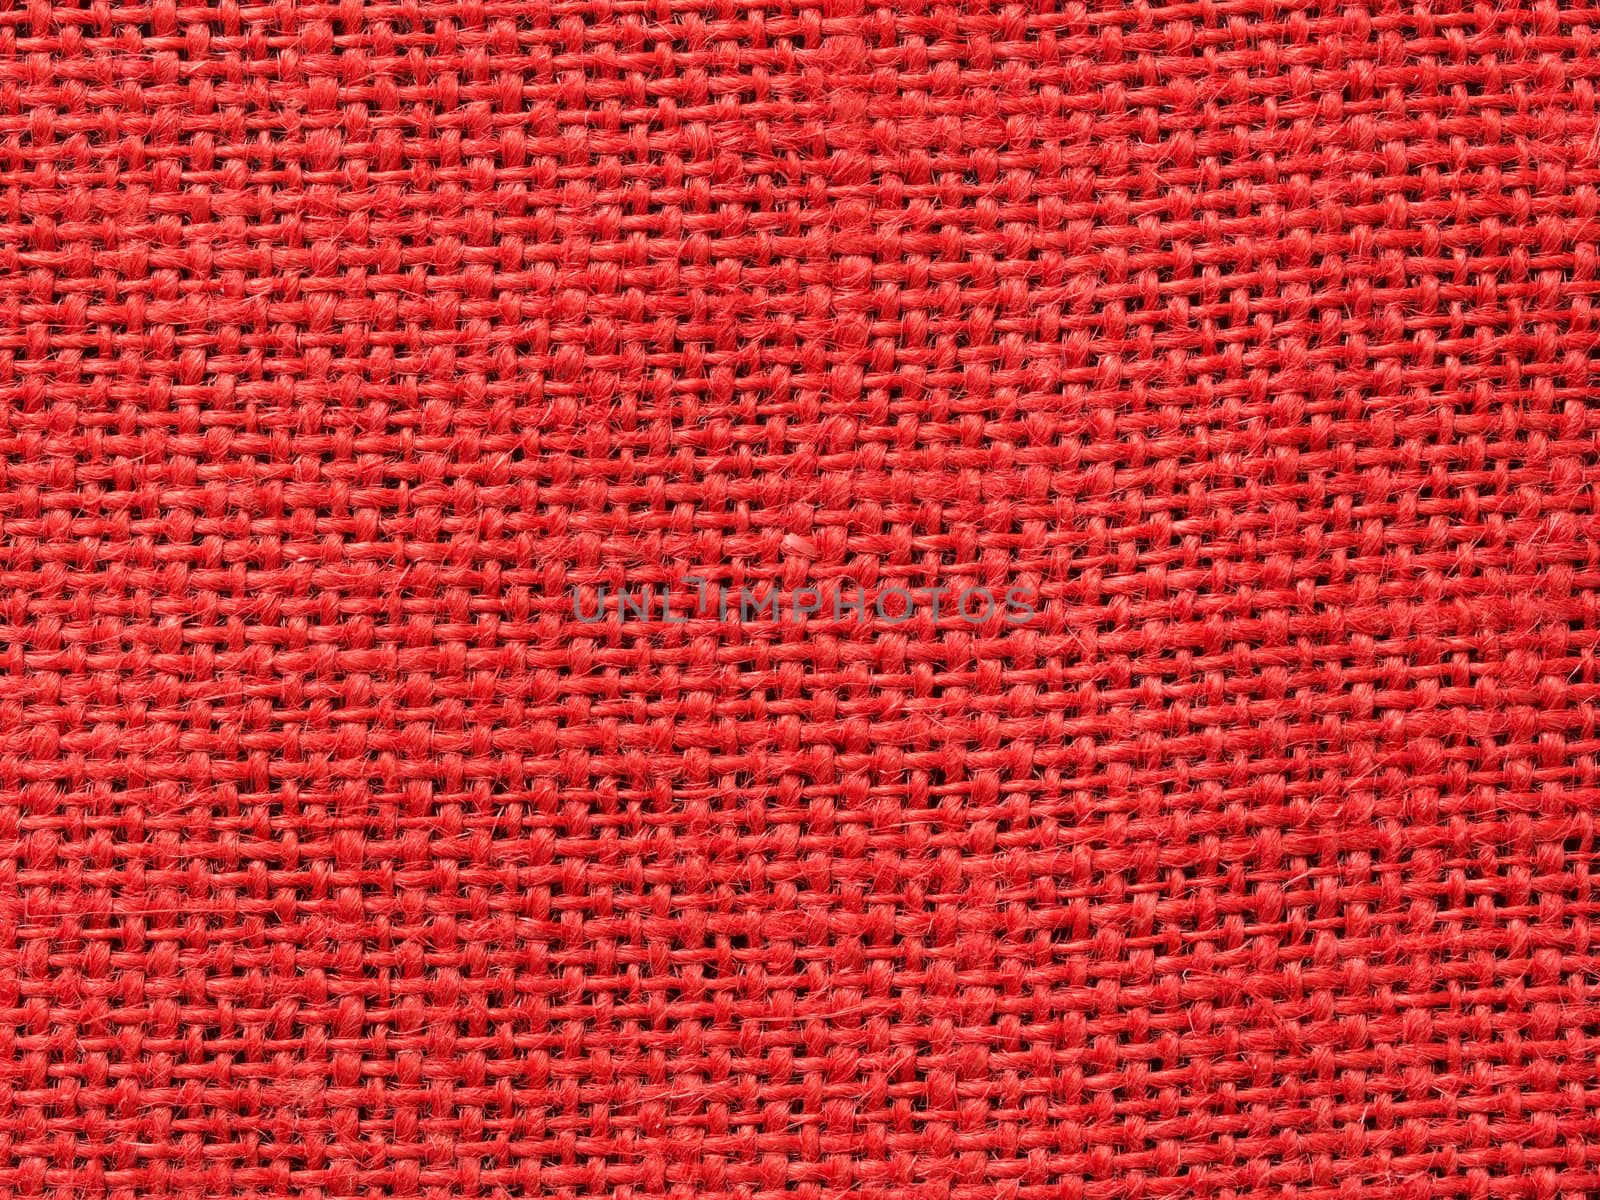 red burlap fabric texture background by zkruger